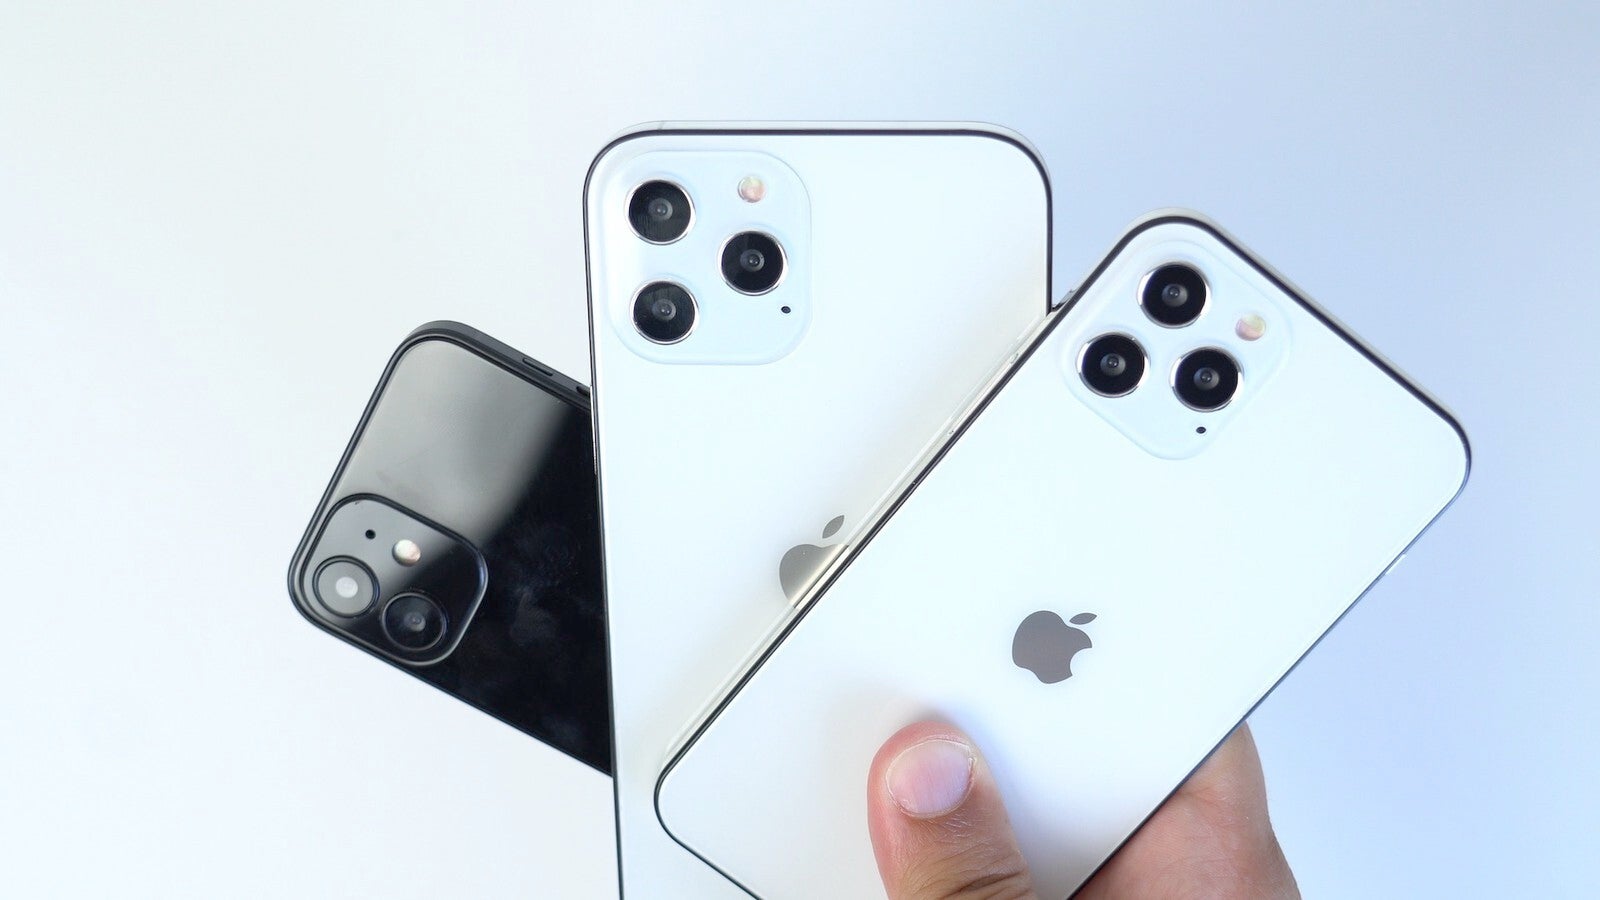 Dummy models representing the 5.4-inch, 6.7-inch, and 6.1-inch screen sizes of the iPhone 12 series - Latest dummy units for the 5G Apple iPhone 12 series remain in line with previous rumors and leaks